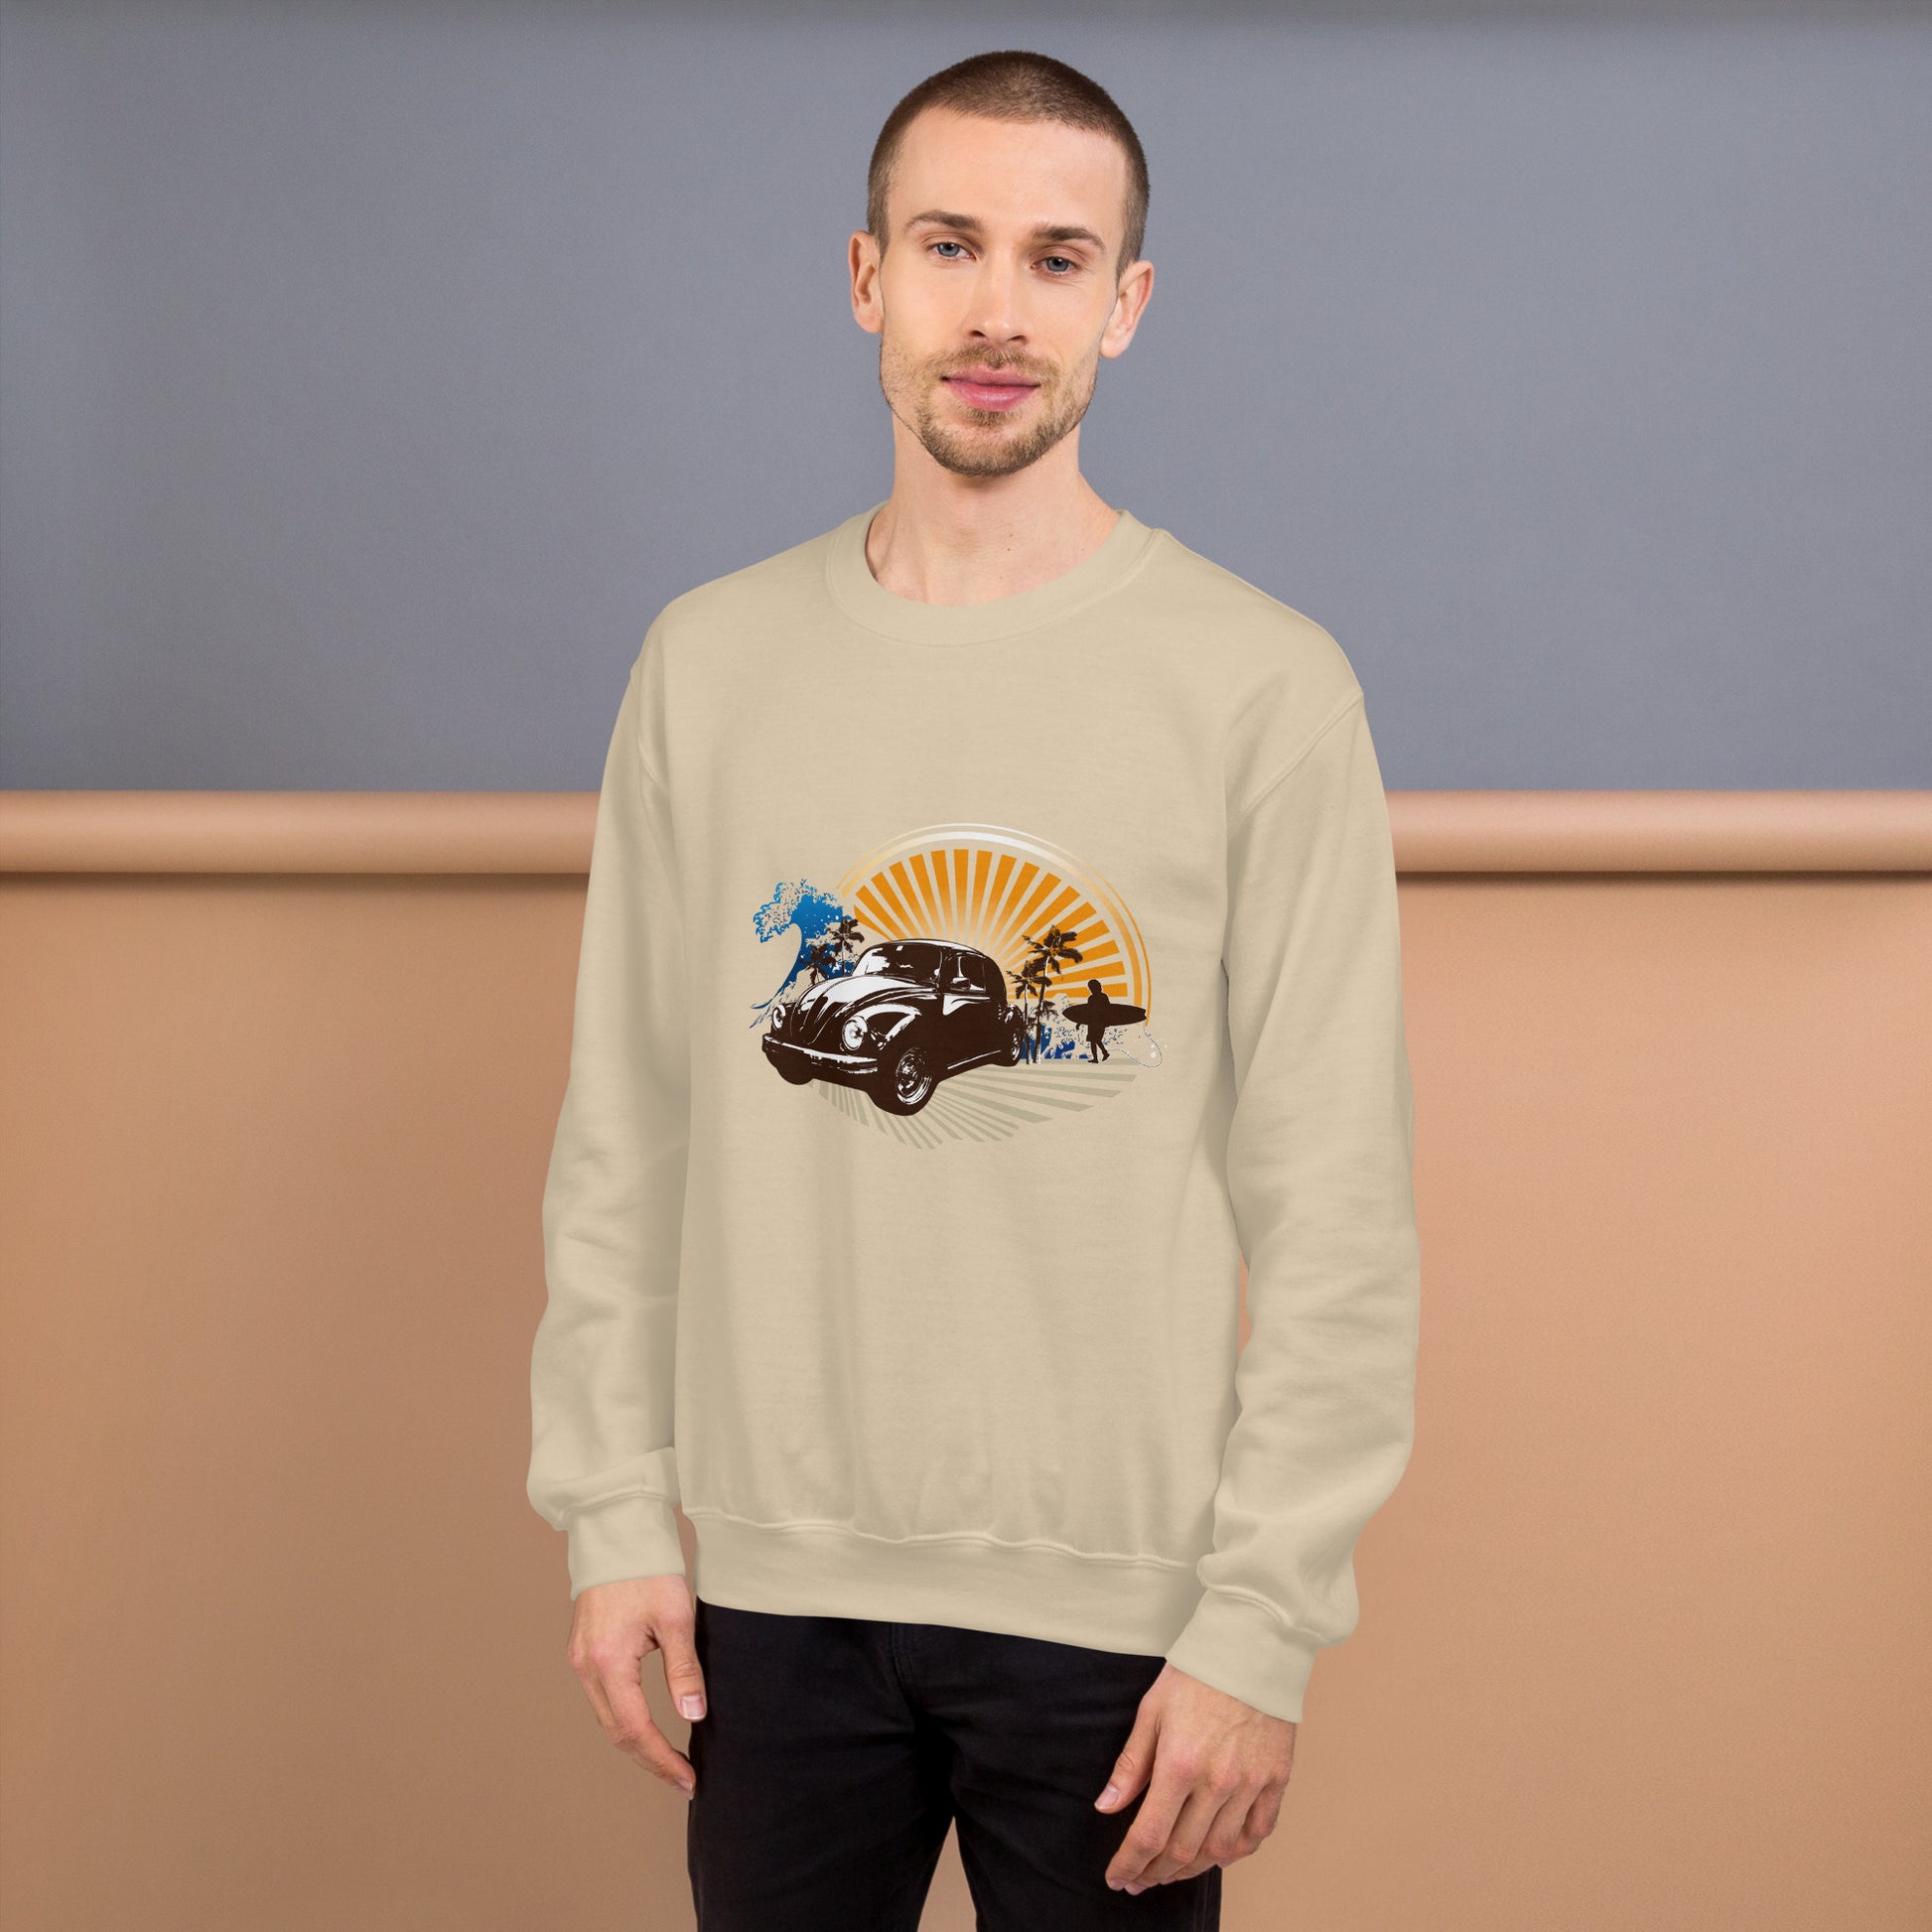 Men with sand sweatshirt with sunset and beetle car